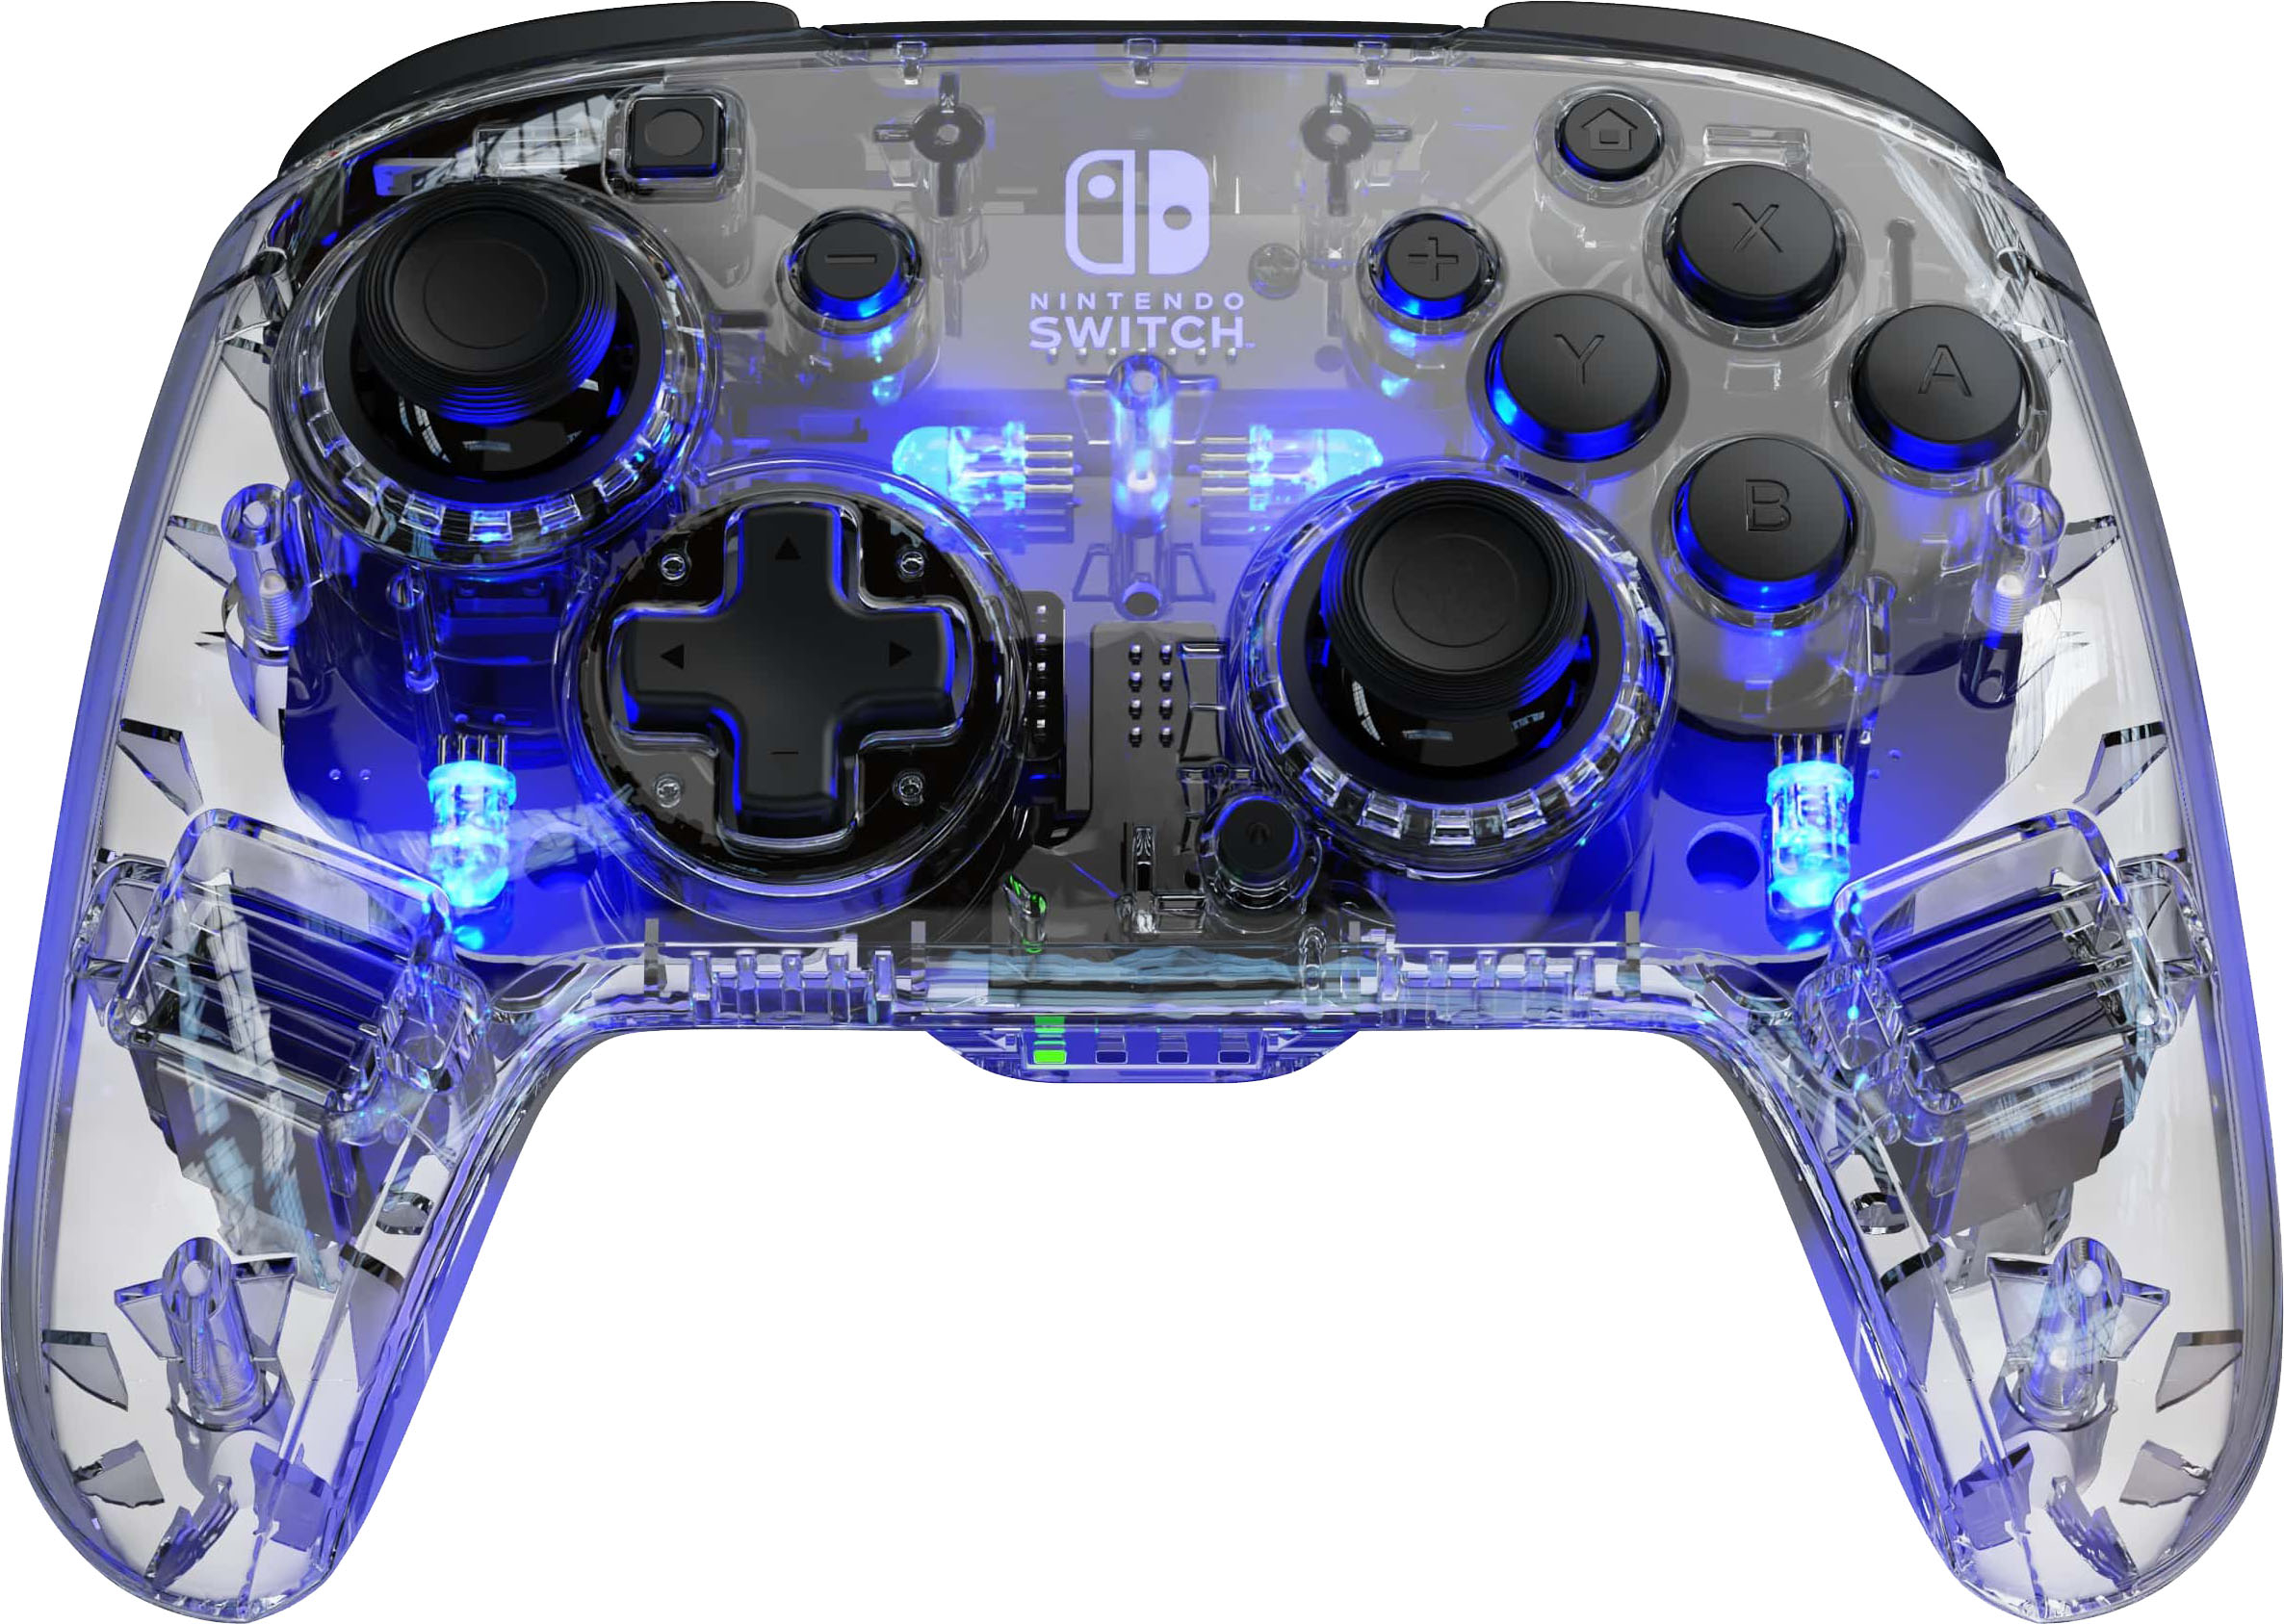 PDP Afterglow LED Wireless Deluxe Gaming Controller: Multicolor 